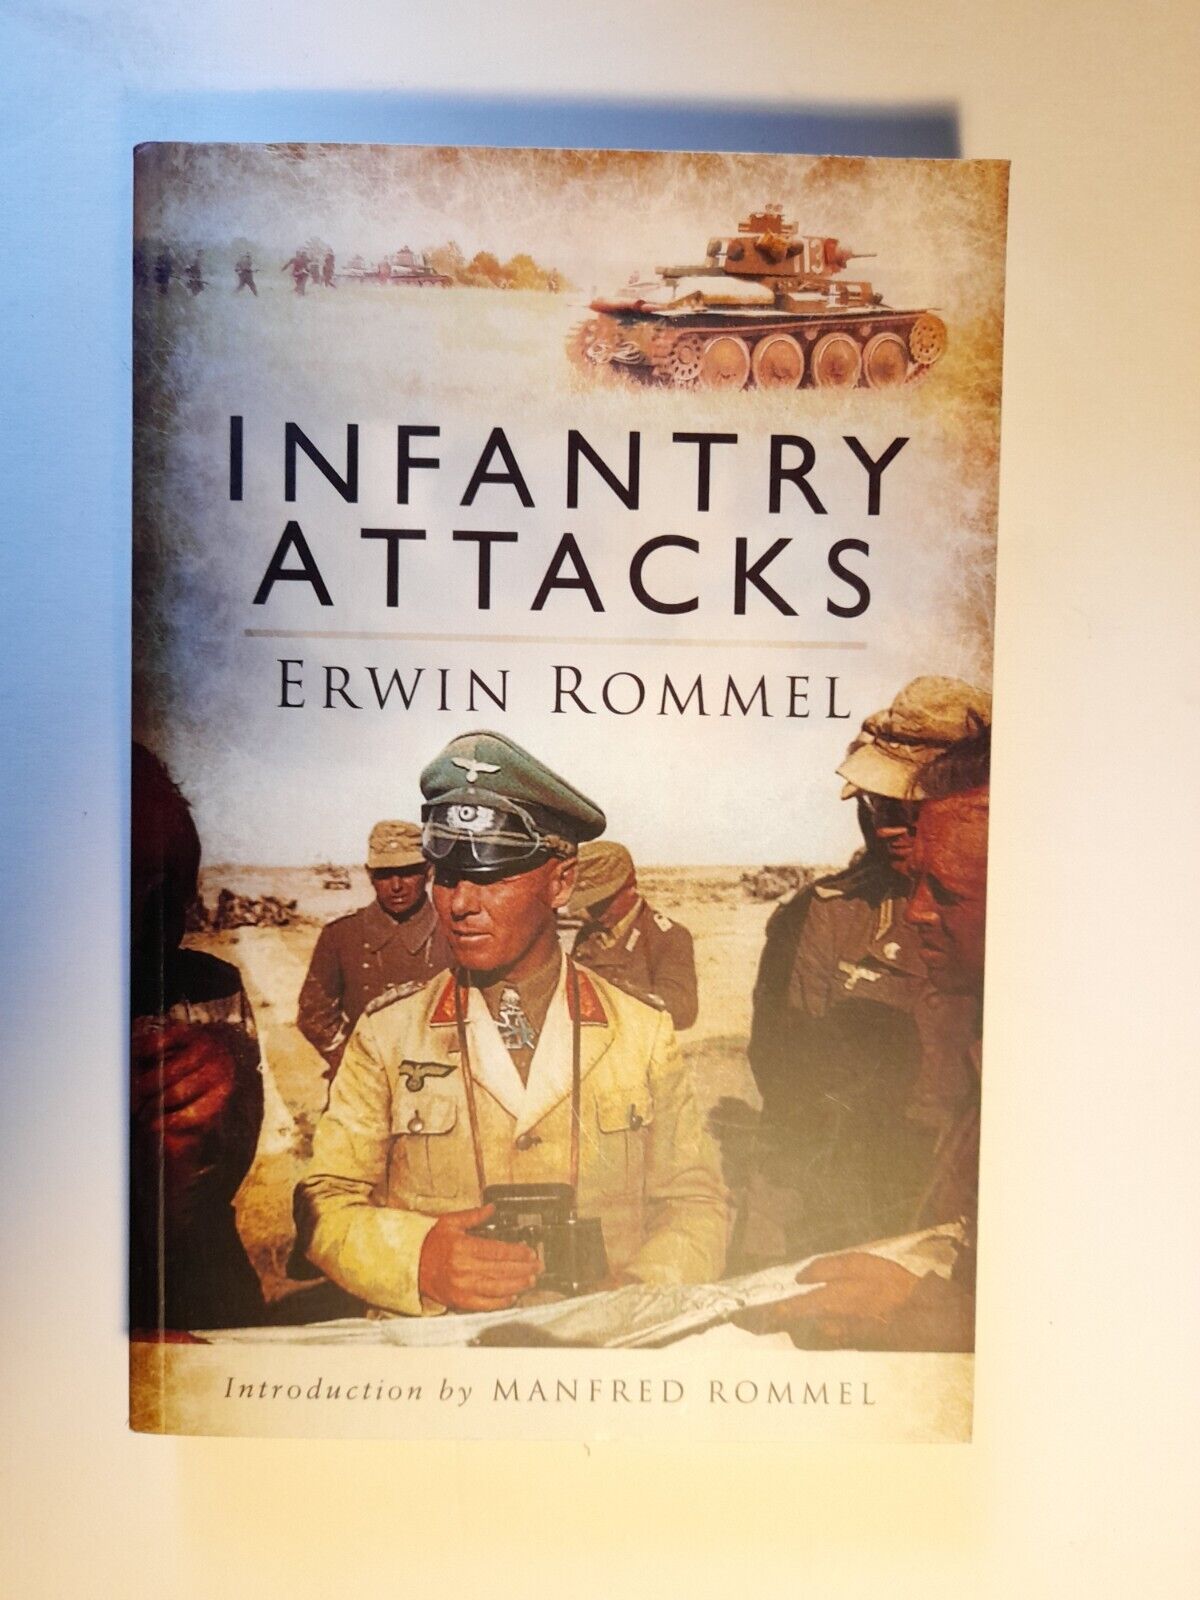 Infantry Attacks Paperback by Erwin Rommel (Author)